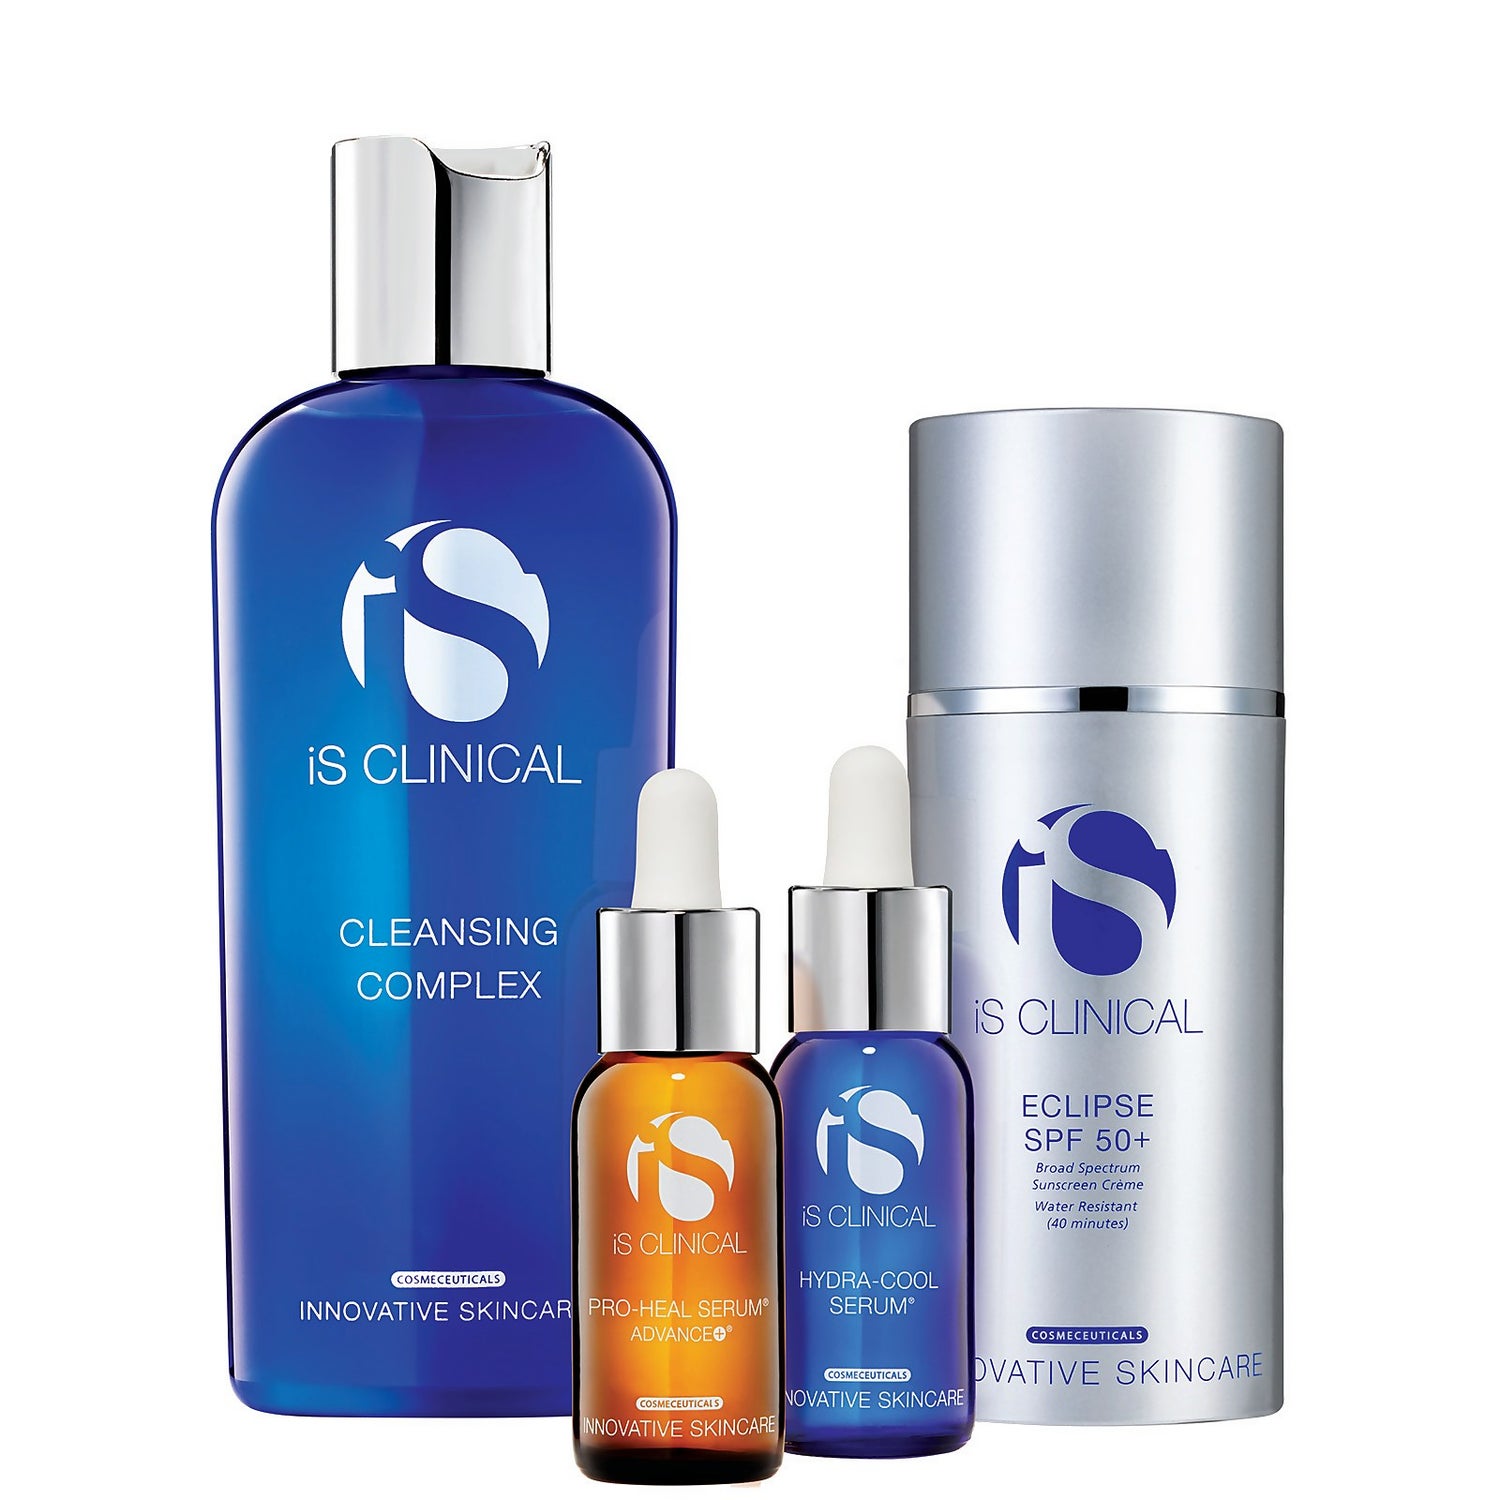 iS Clinical Pure Calm Collection (Worth $232.00)